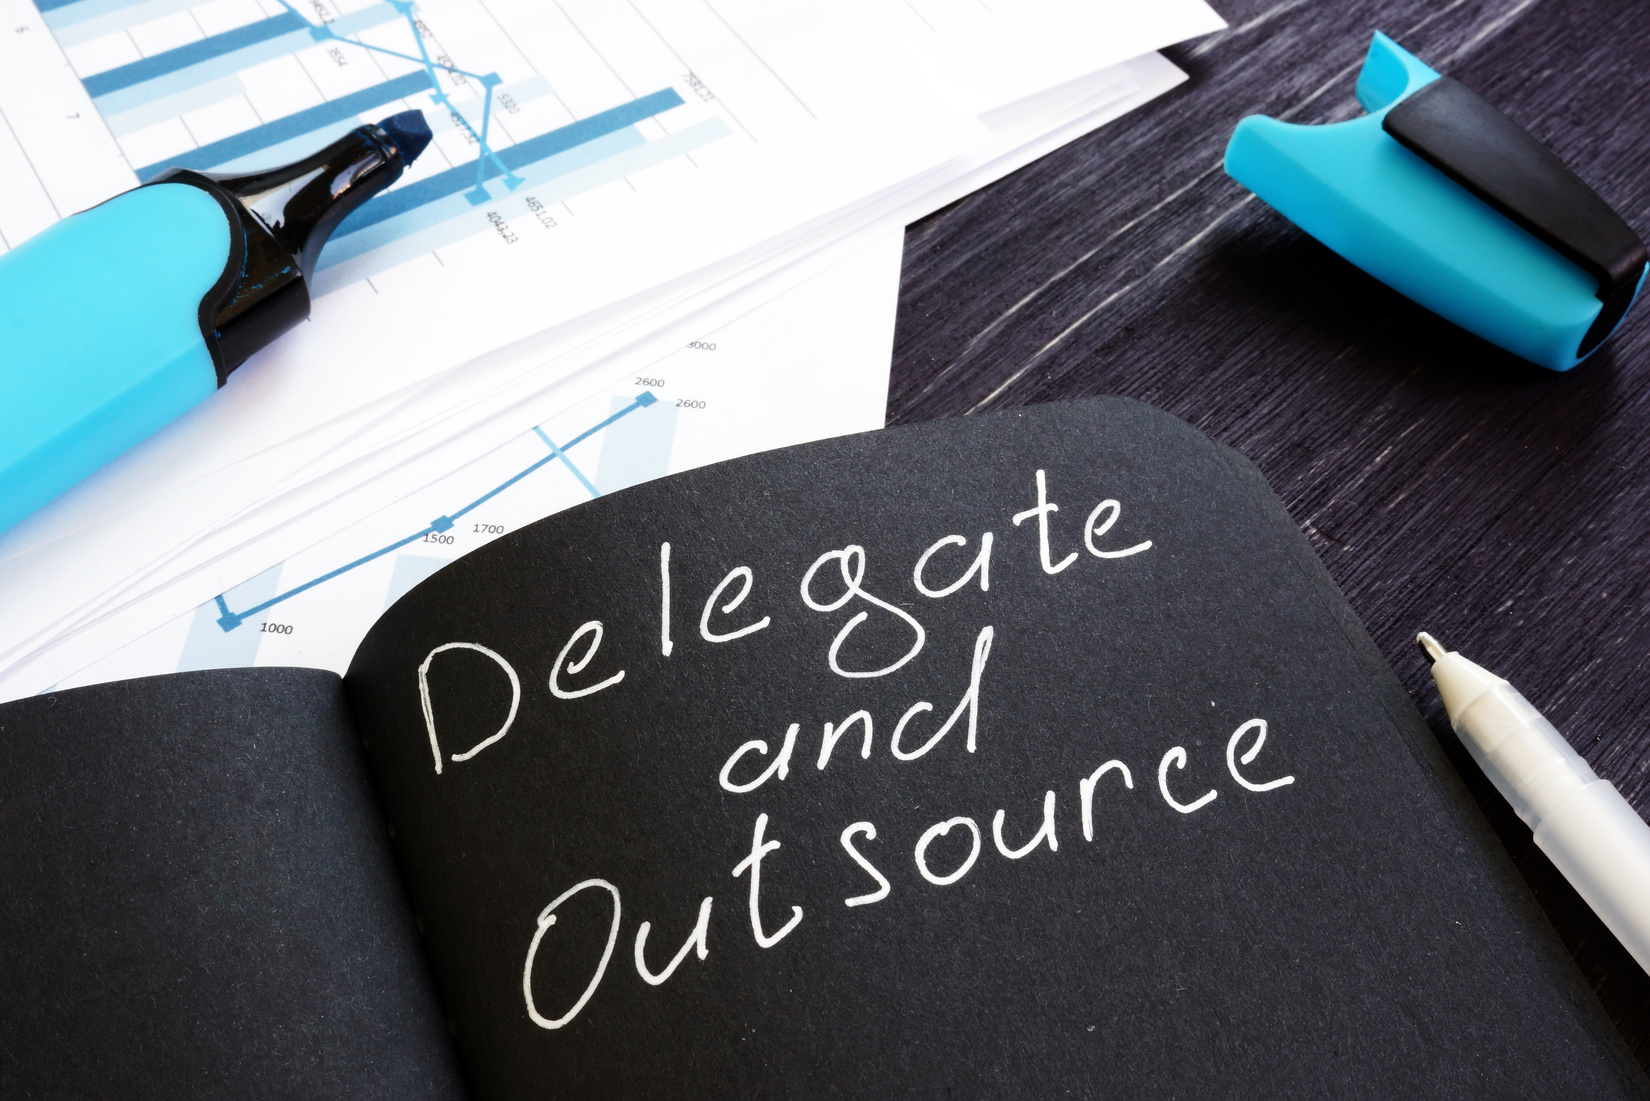 Delegate and Outsource written on a black page. Delegation cincept.